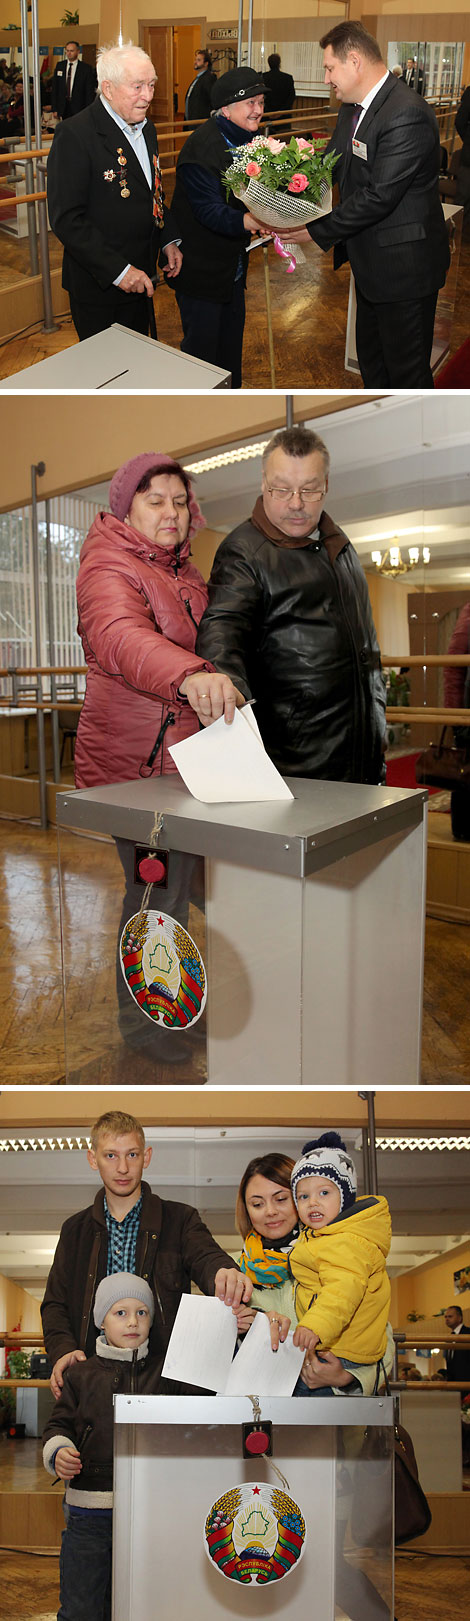 The main voting day during the Belarus president election